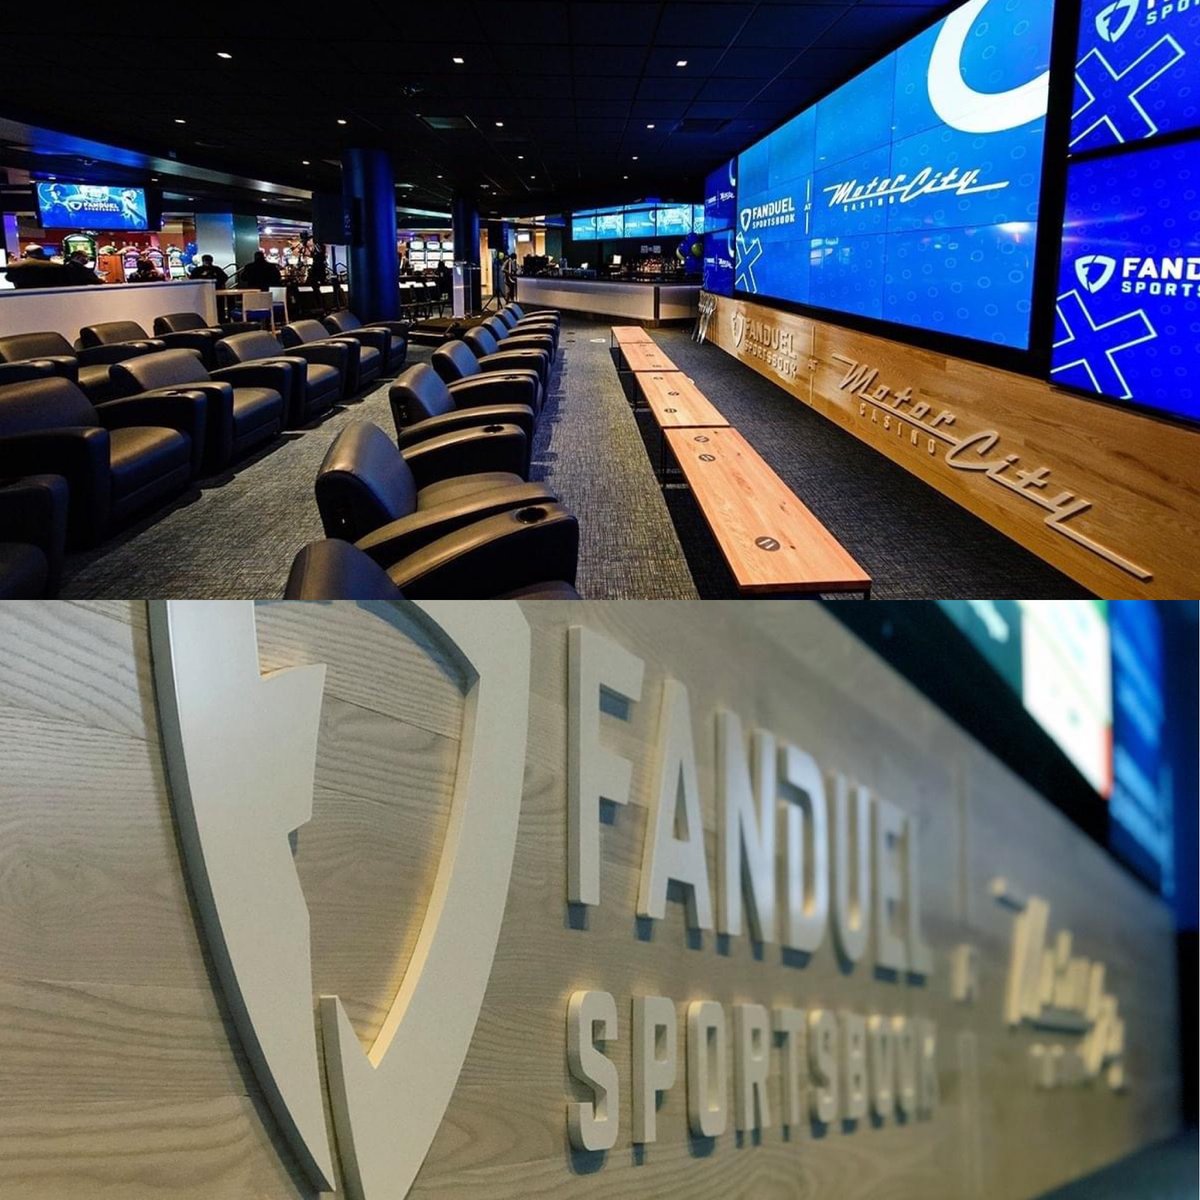 Who do you think Detroit is choosing for their first pick of the draft? 👇 Catch all the action at FanDuel Sportsbook at MotorCity Casino!